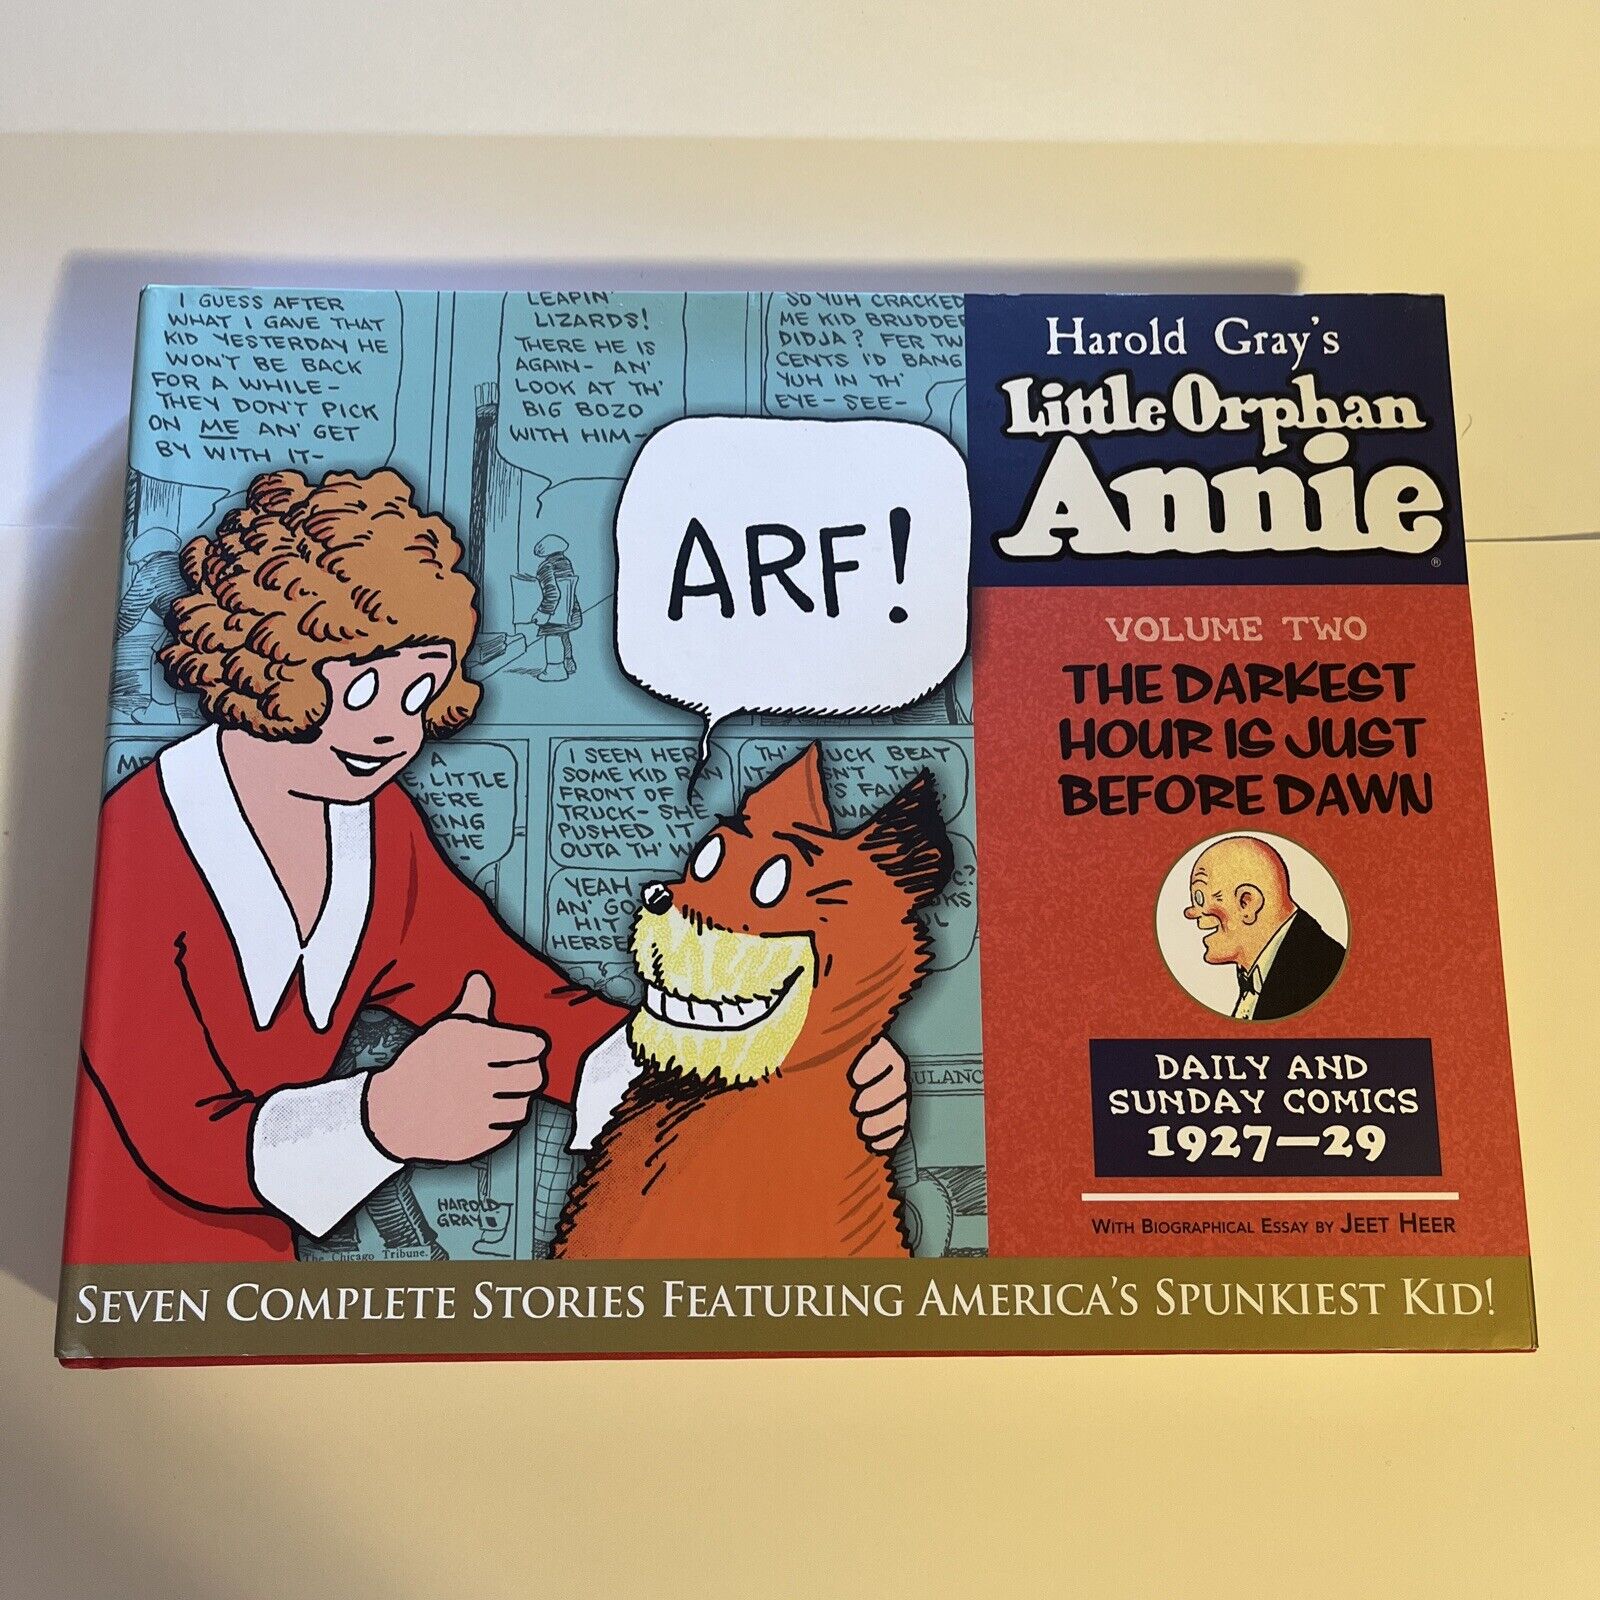 The Complete Little Orphan Annie Volume 2 (IDW Publishing, 2009 Hardcover)